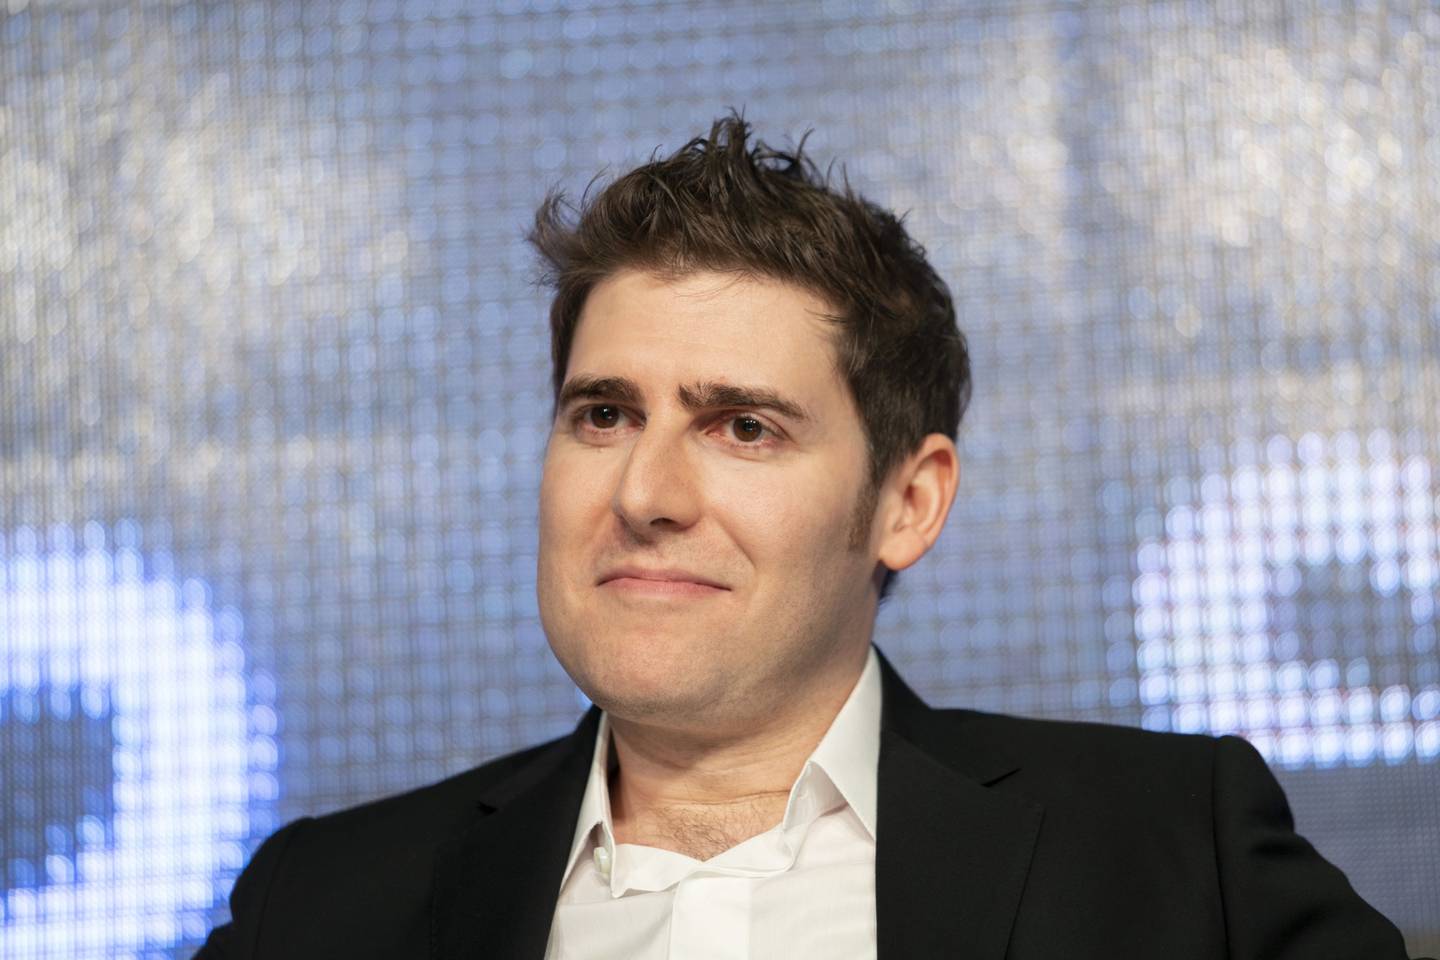 Eduardo Saverin, Brazilian co-founder of Facebook, at the FinTech Festival in Singapore in 2018. Photo: Wei Leng Tay/Bloomberg